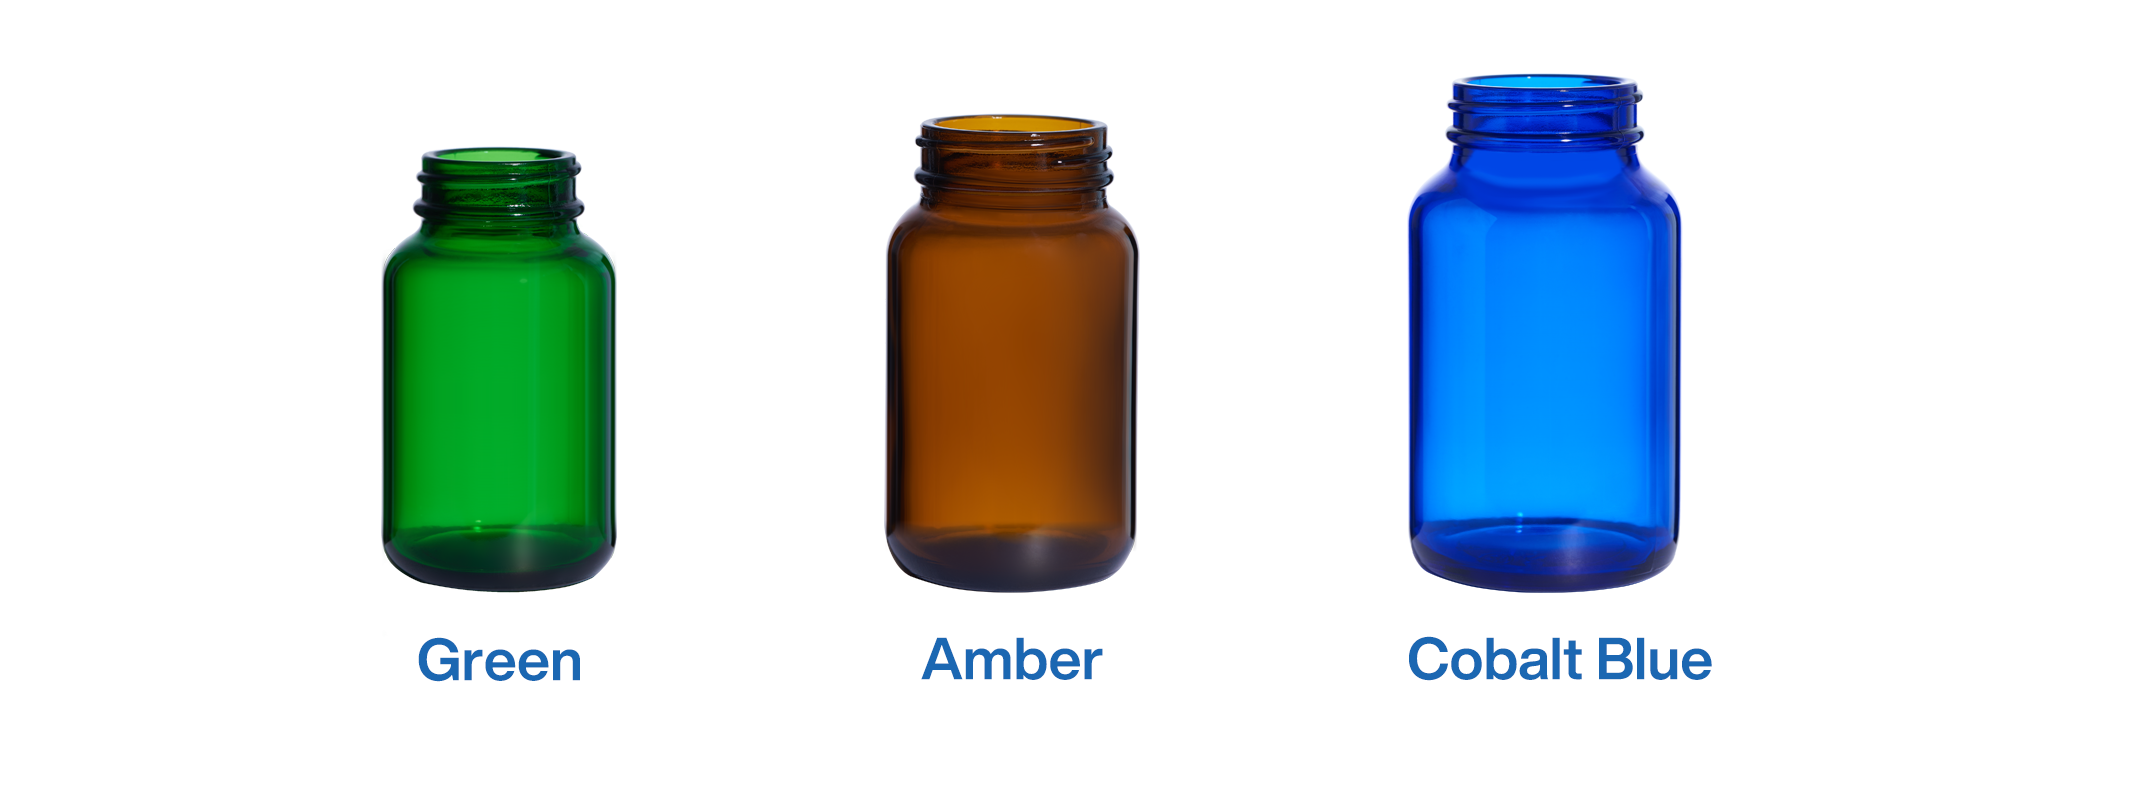 Colors for Wide-mouth Glass Bottles.png